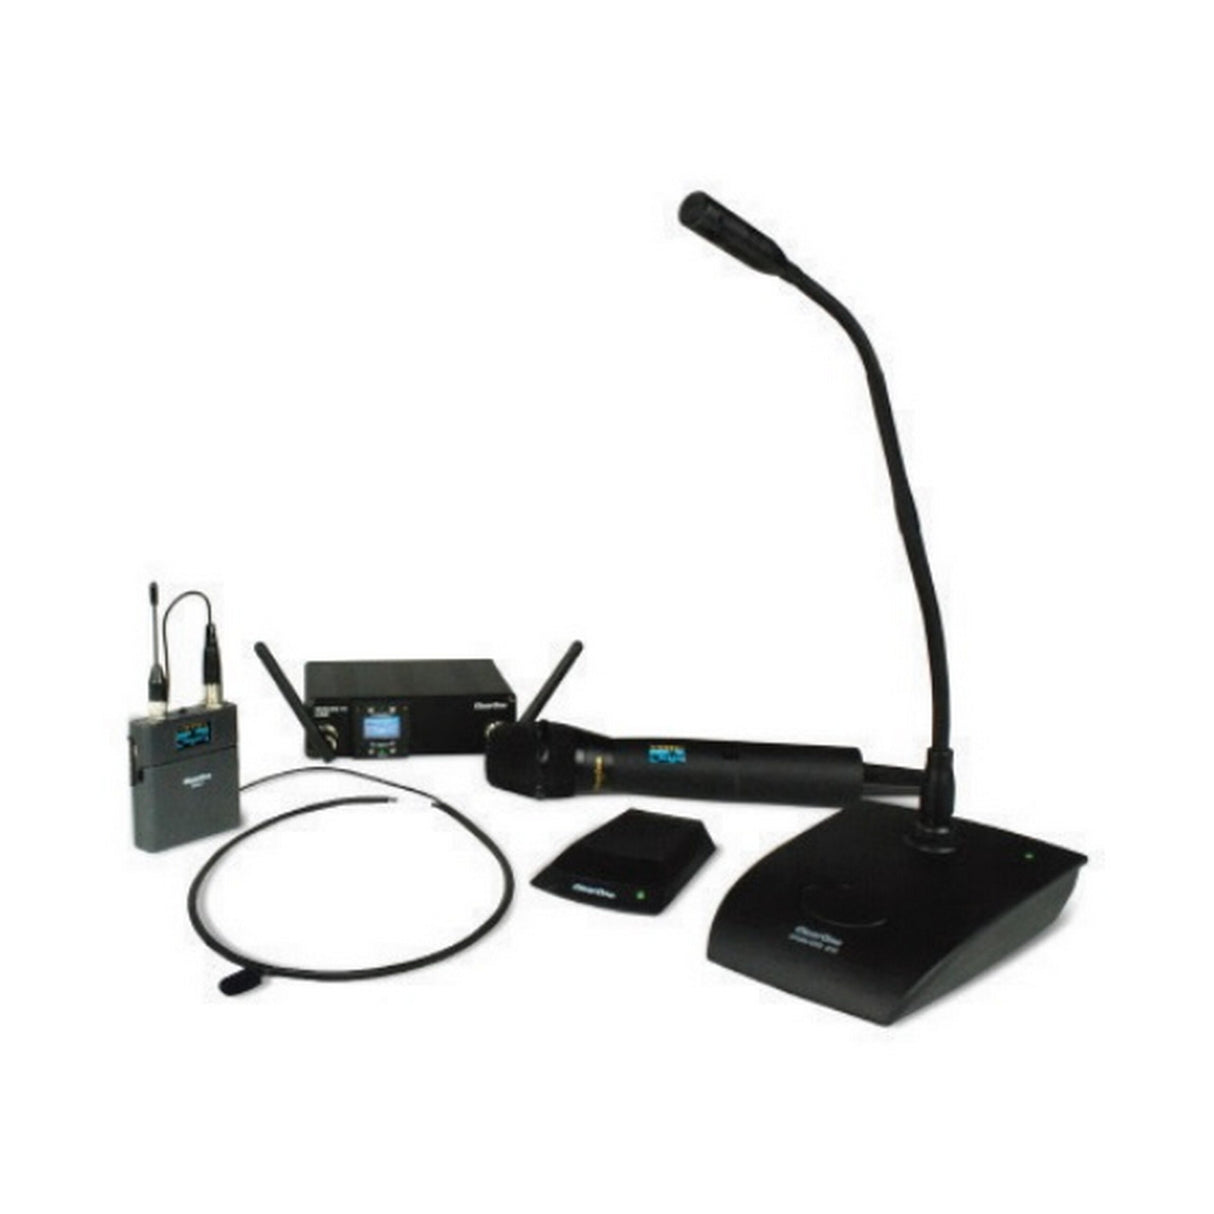 ClearOne DIALOG 10 USB Single Channel Wireless Microphone System, 2.4 GHz to 2.483 GHz